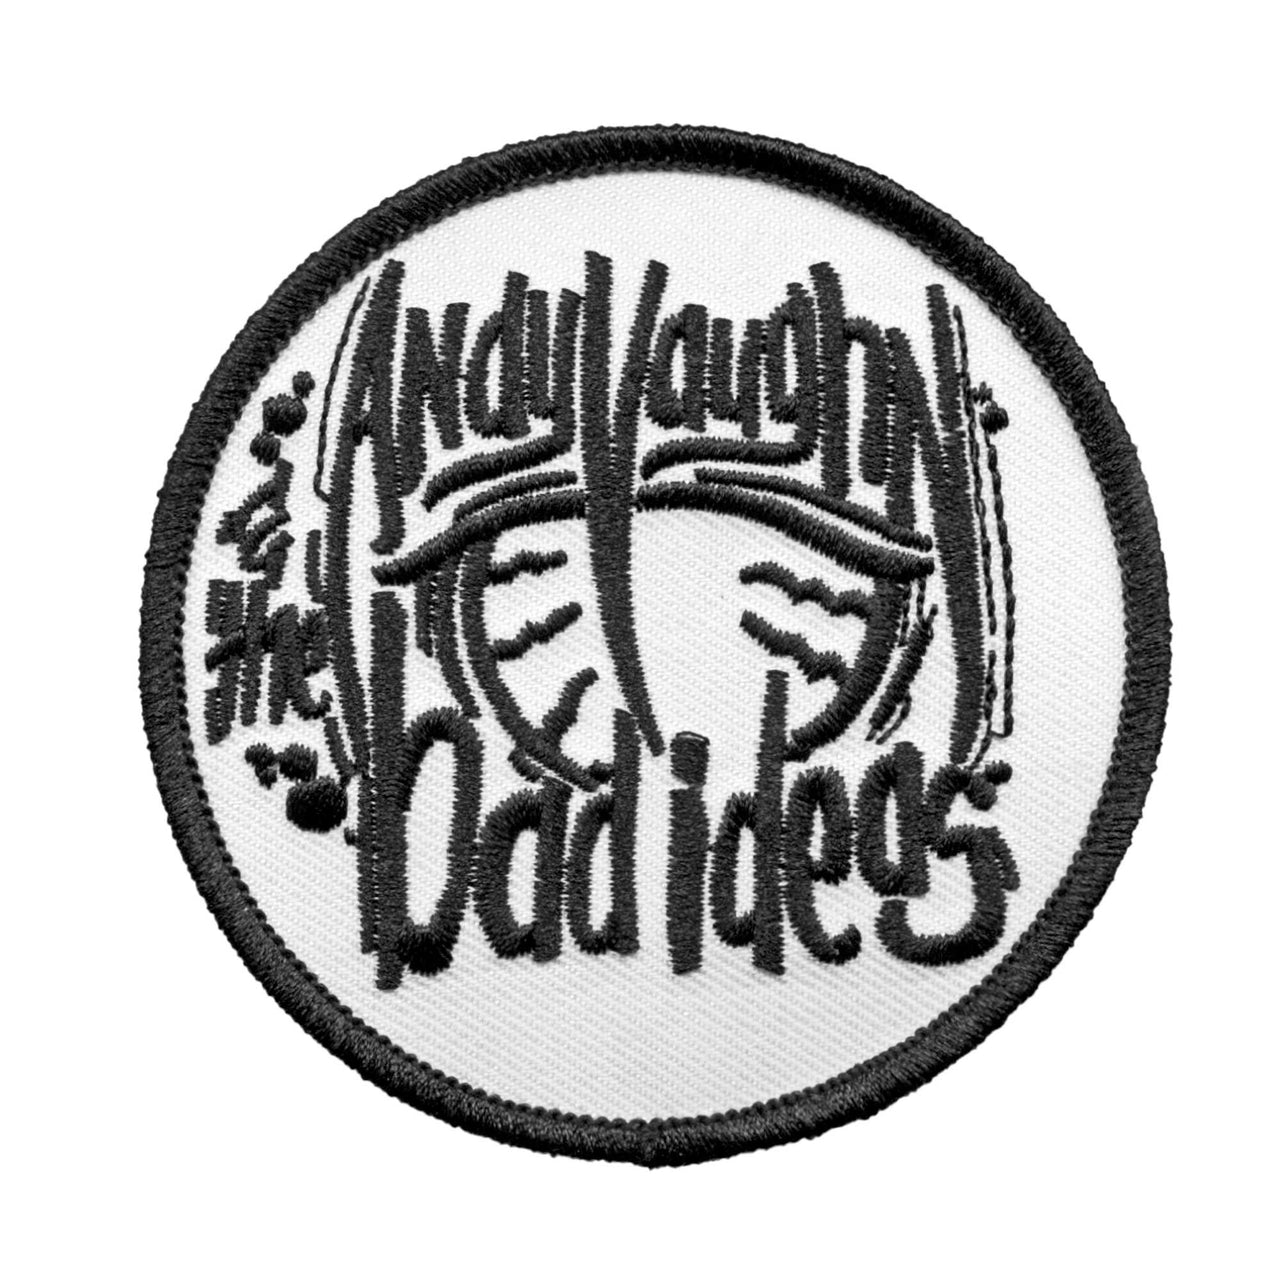 ANDY VAUGHN AND THE BAD IDEAS PATCH